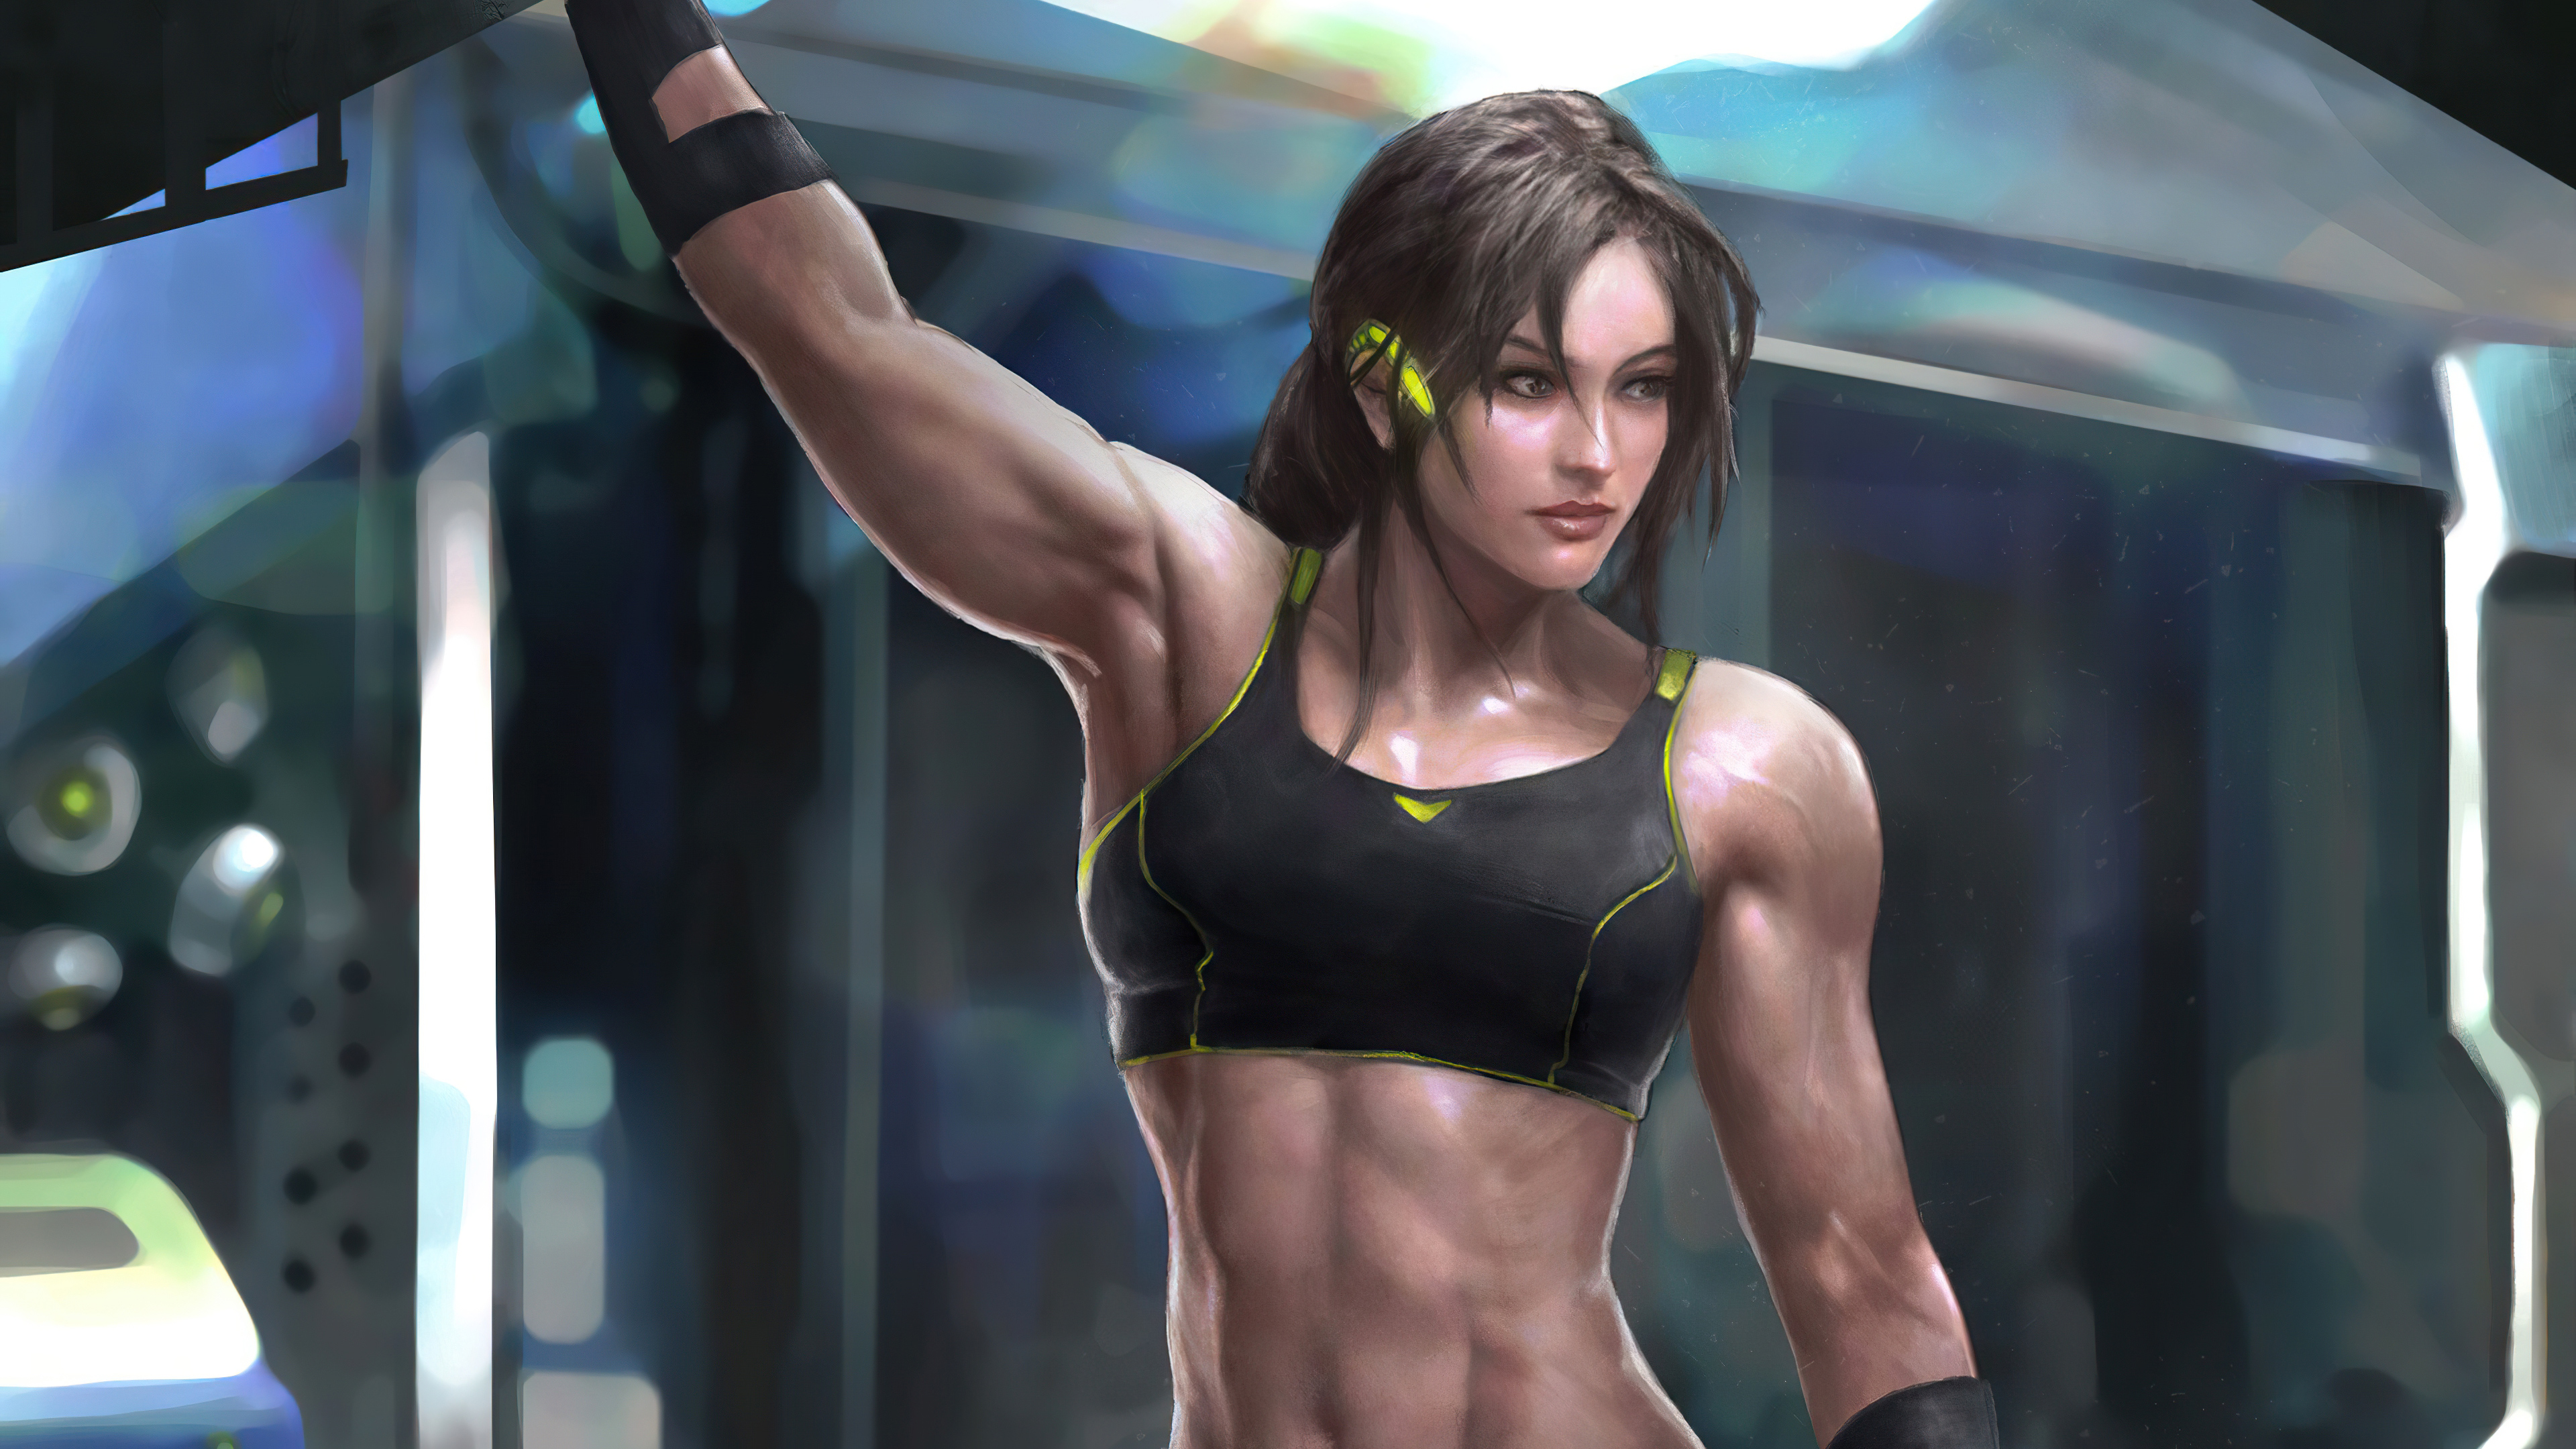 Muscular girl k hd artist k wallpapers images backgrounds photos and pictures